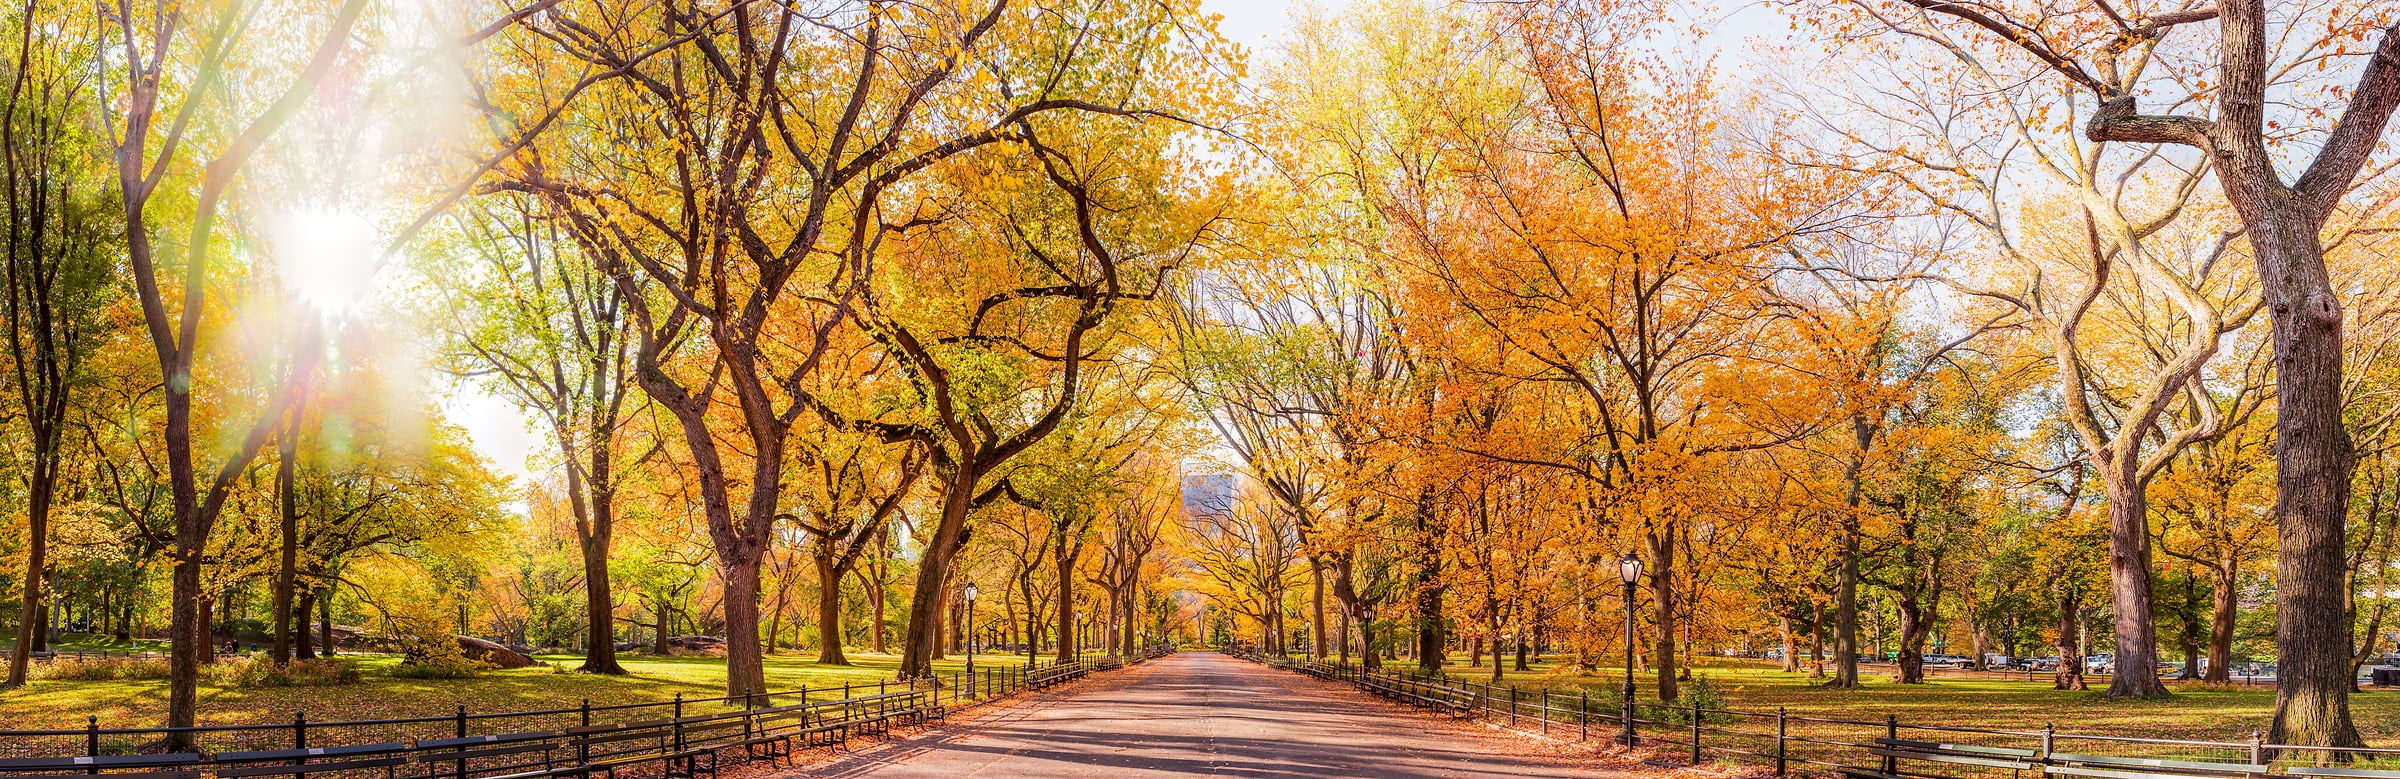 4,103 megapixels! A very high definition VAST photo of autumn trees on the Mall in Central Park in New York City at sunrise; created by Dan Piech